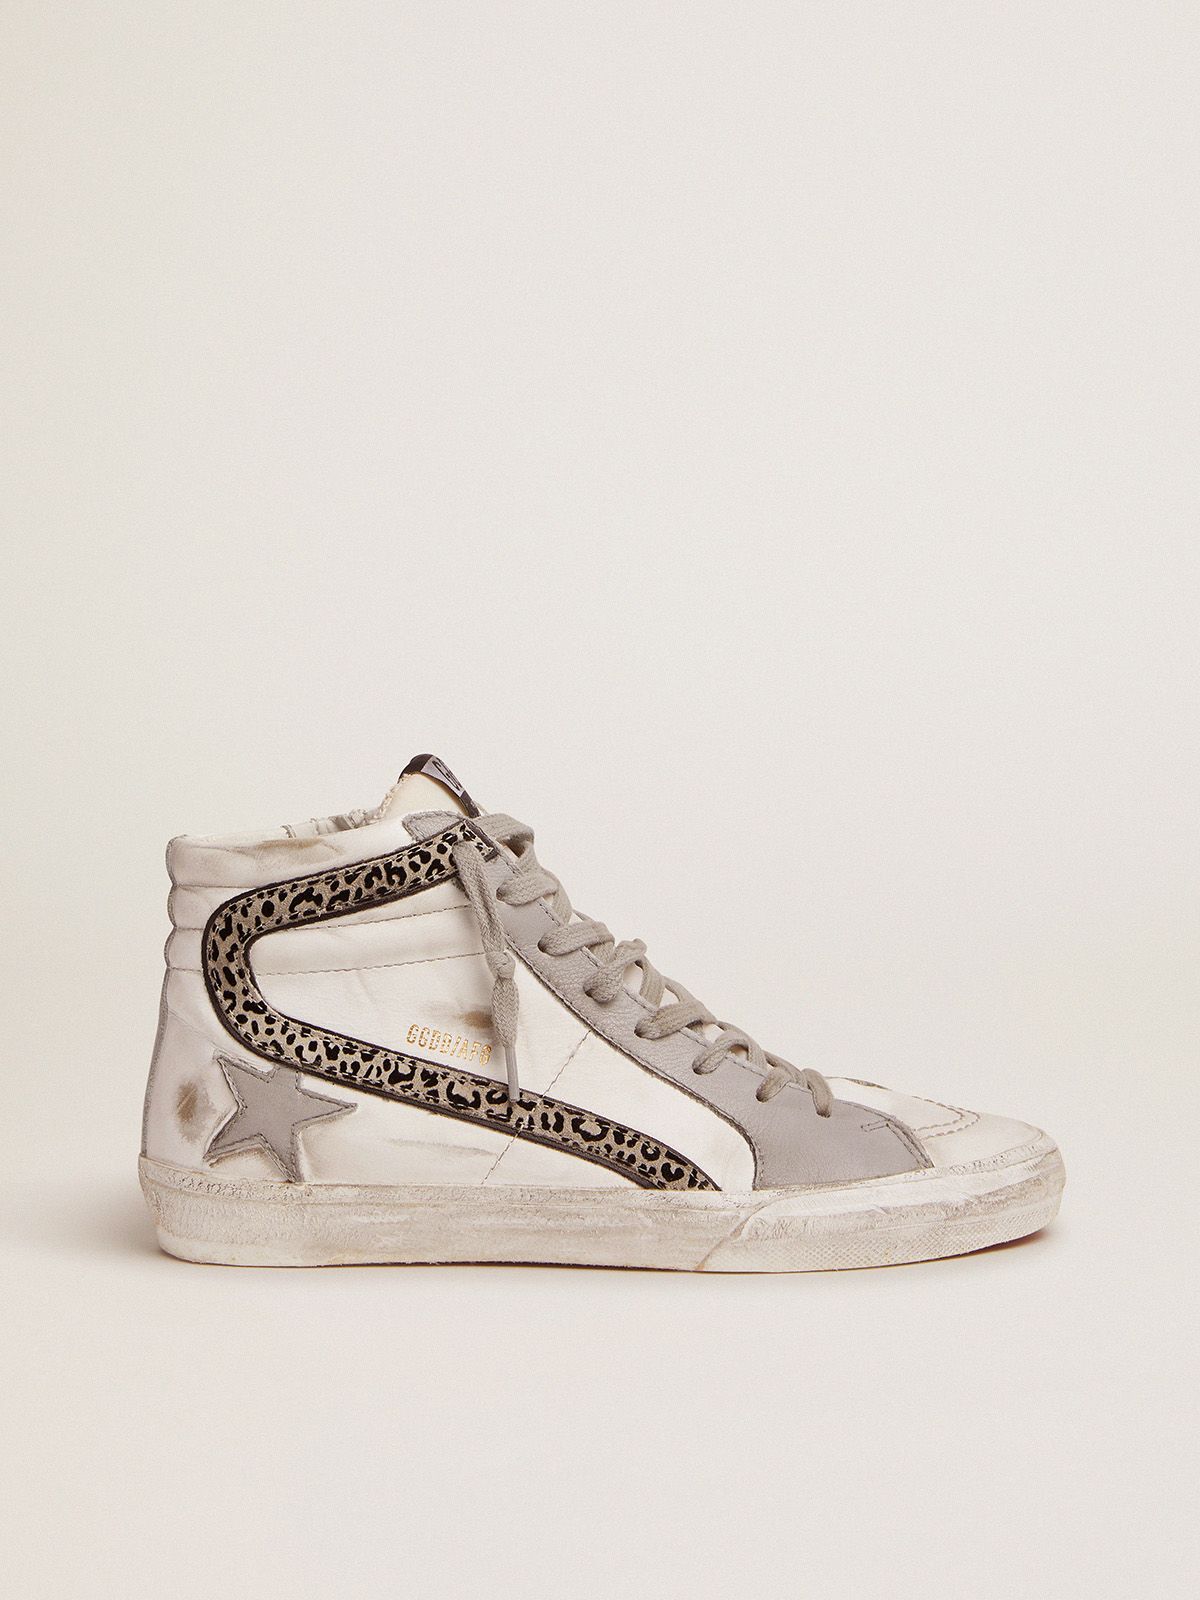 golden goose gray with leopard-print Slide and sneakers leather white flash upper suede